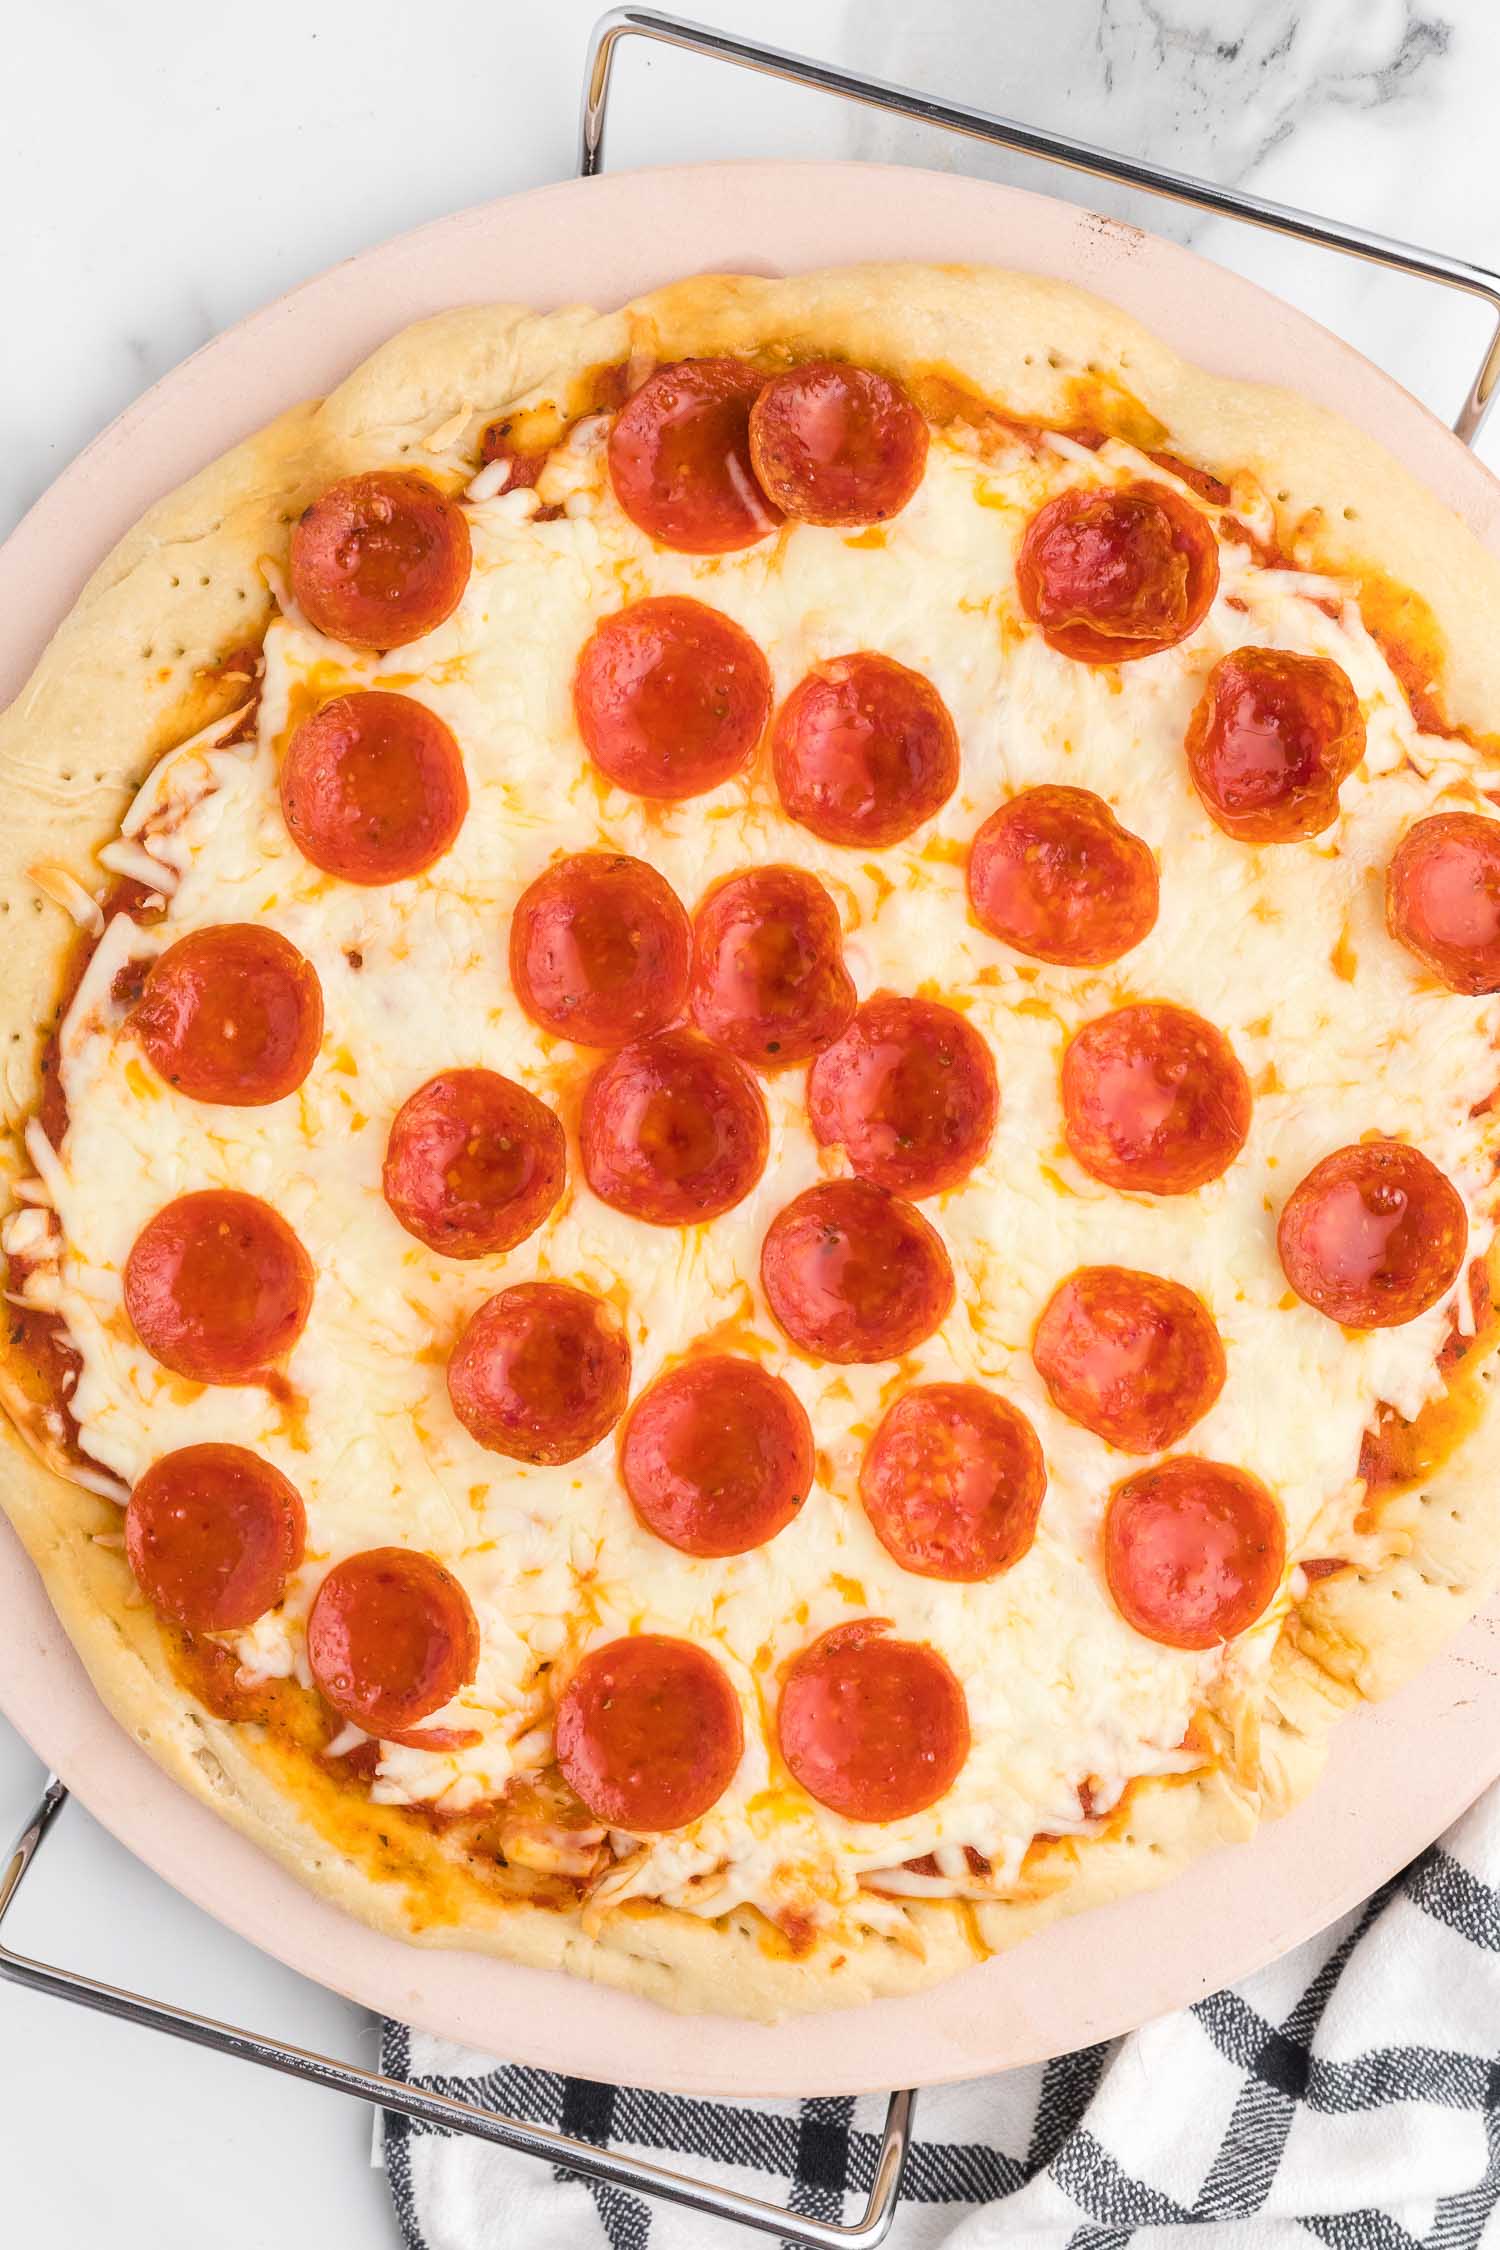 A whole pepperoni pizza on a pizza stone.